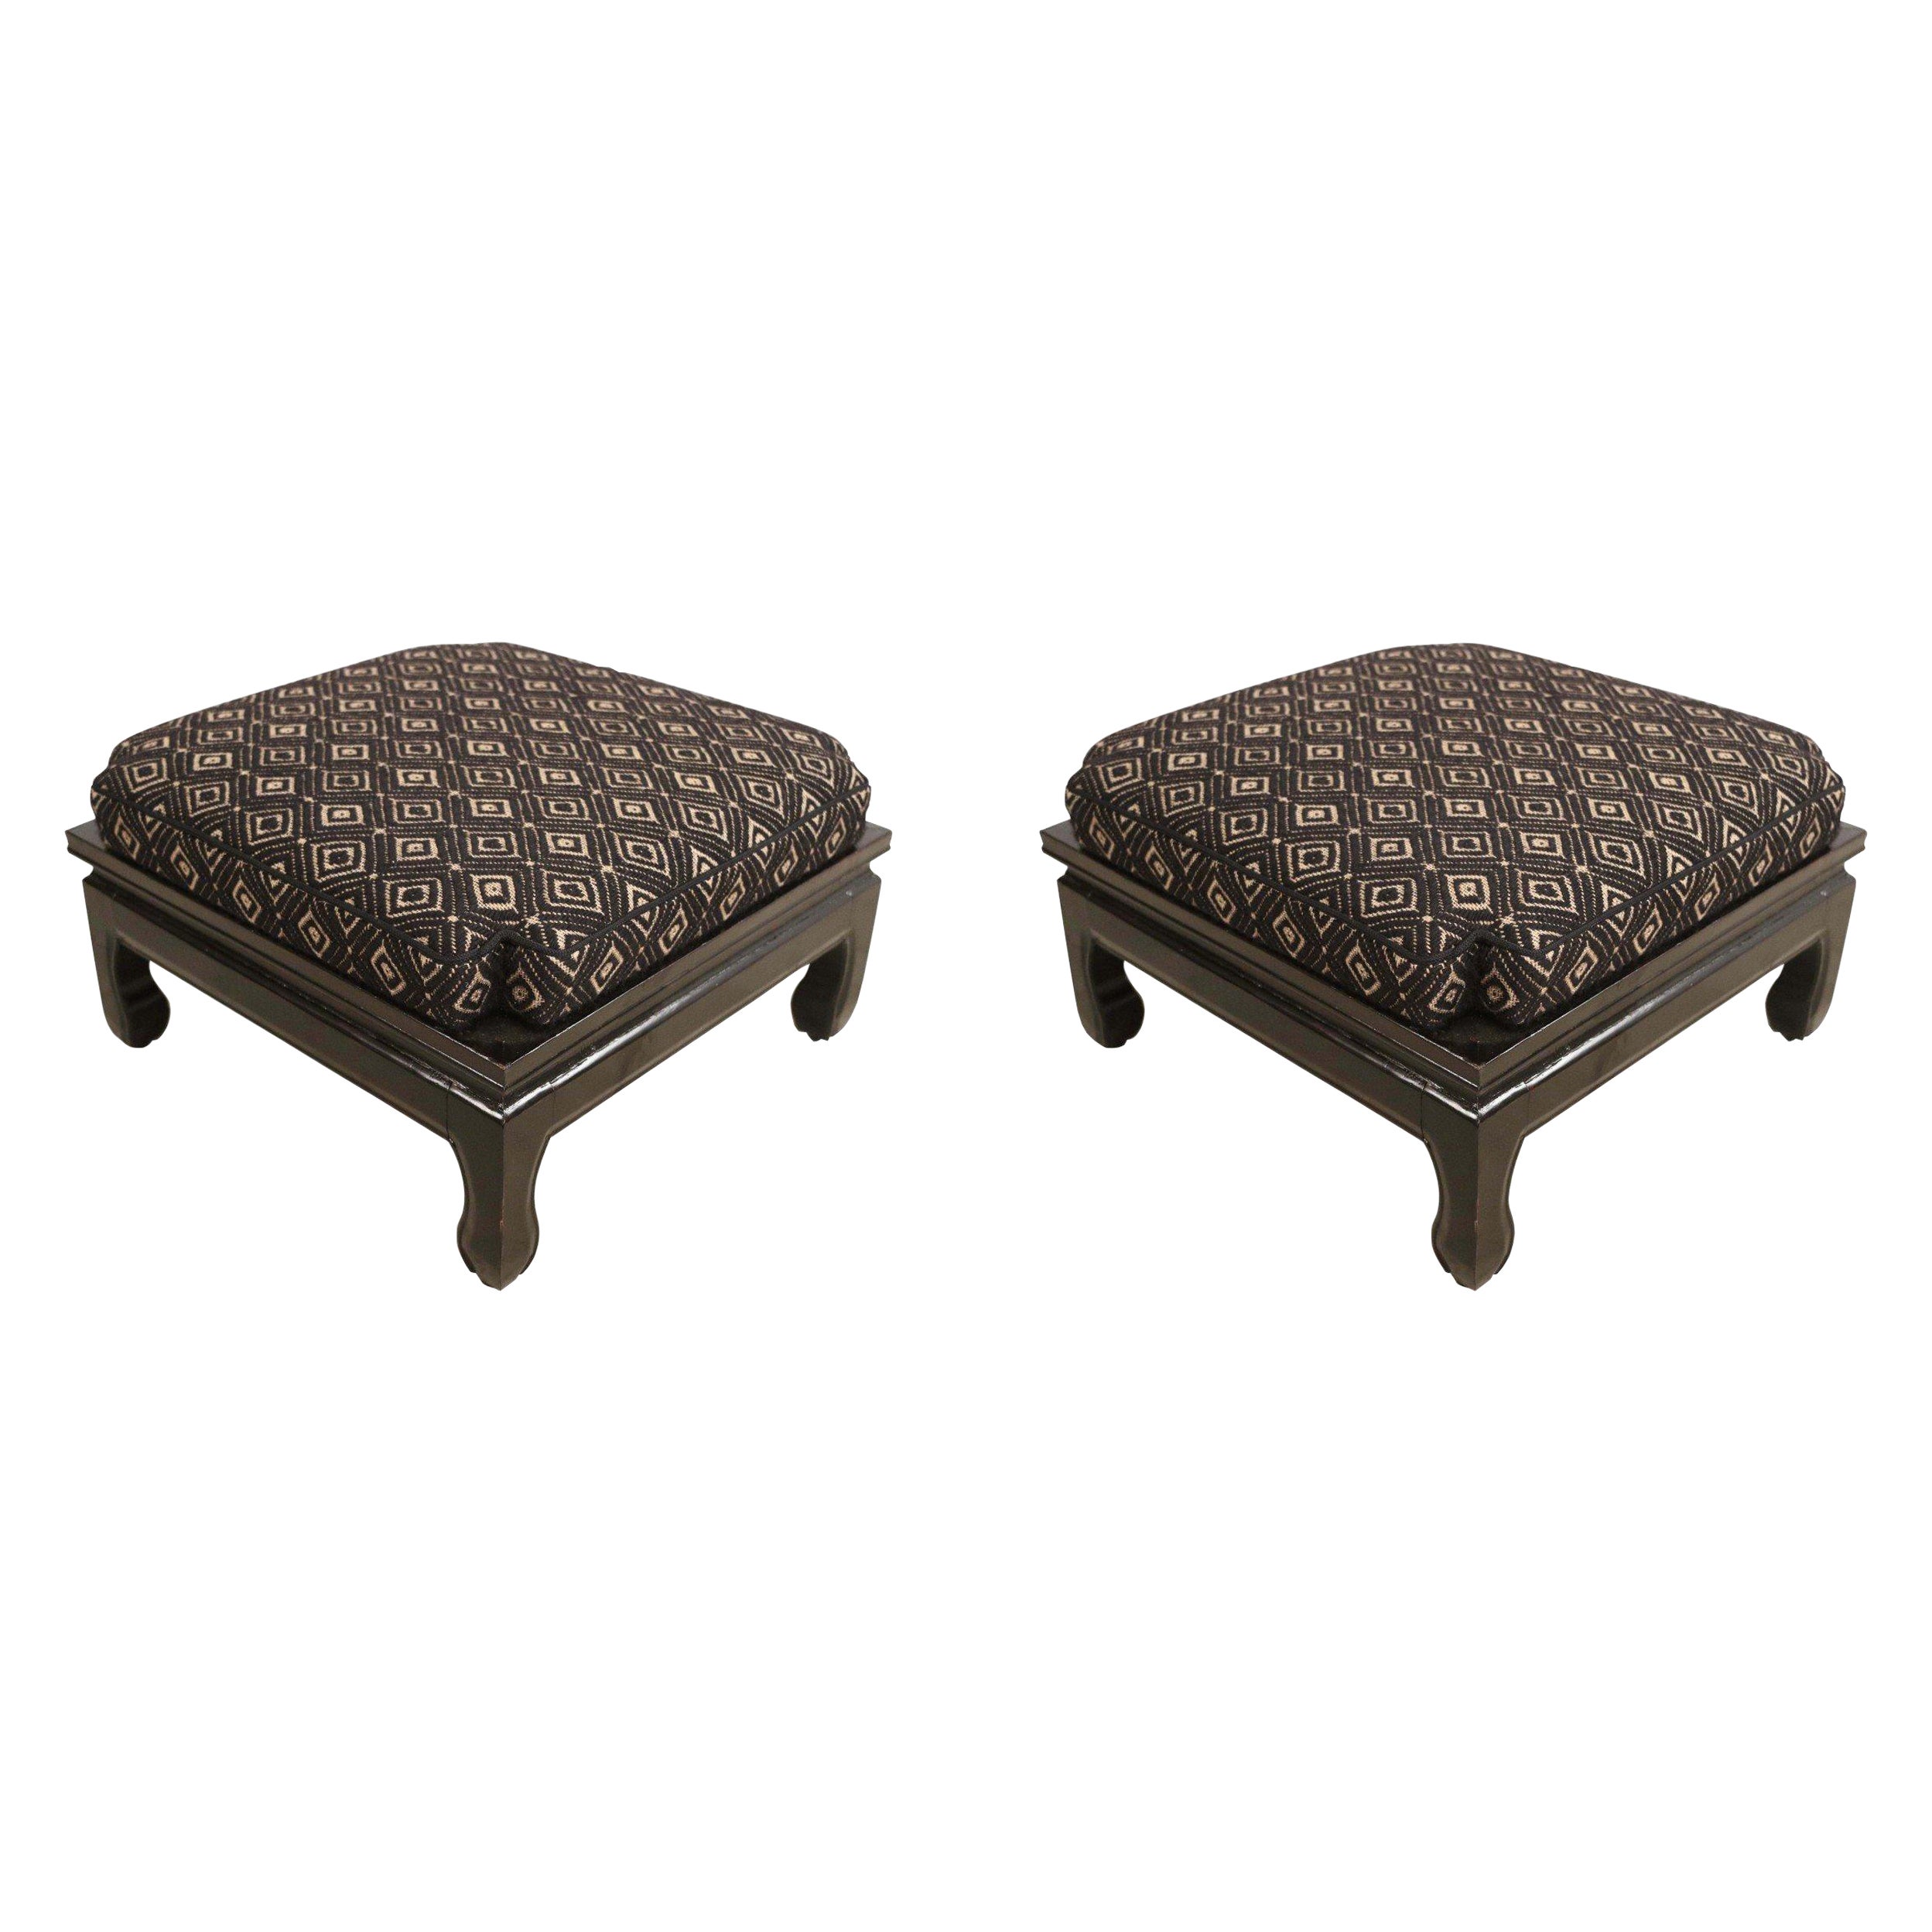 Contemporary Black Lacquer and Upholstery Square Footstools For Sale